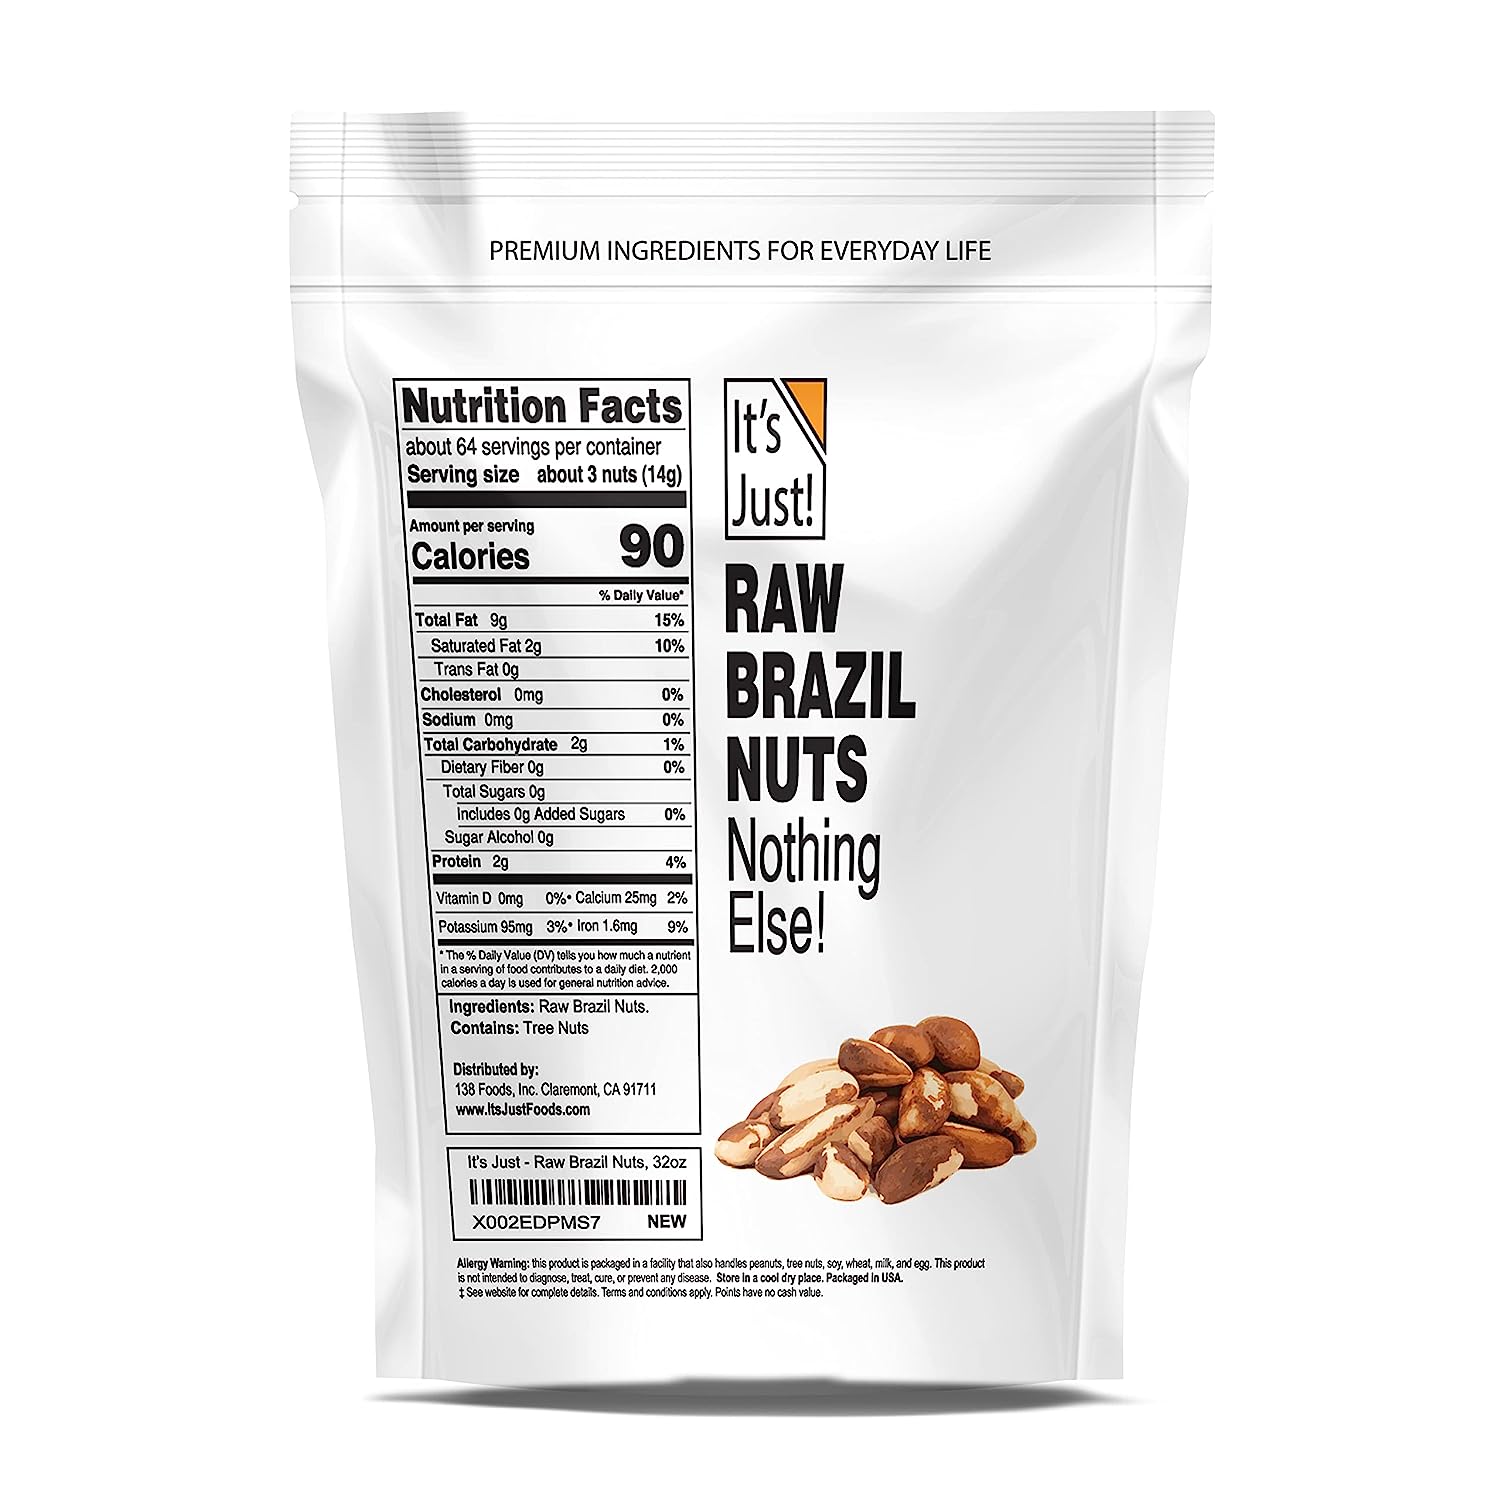 It's Just - Raw Brazil Nuts, 2lb (32oz), Unsalted, Non-GMO, Keto Friendly, Vegan, No PPO, Large, Premium, Freshly Packaged in USA (32 Ounces)